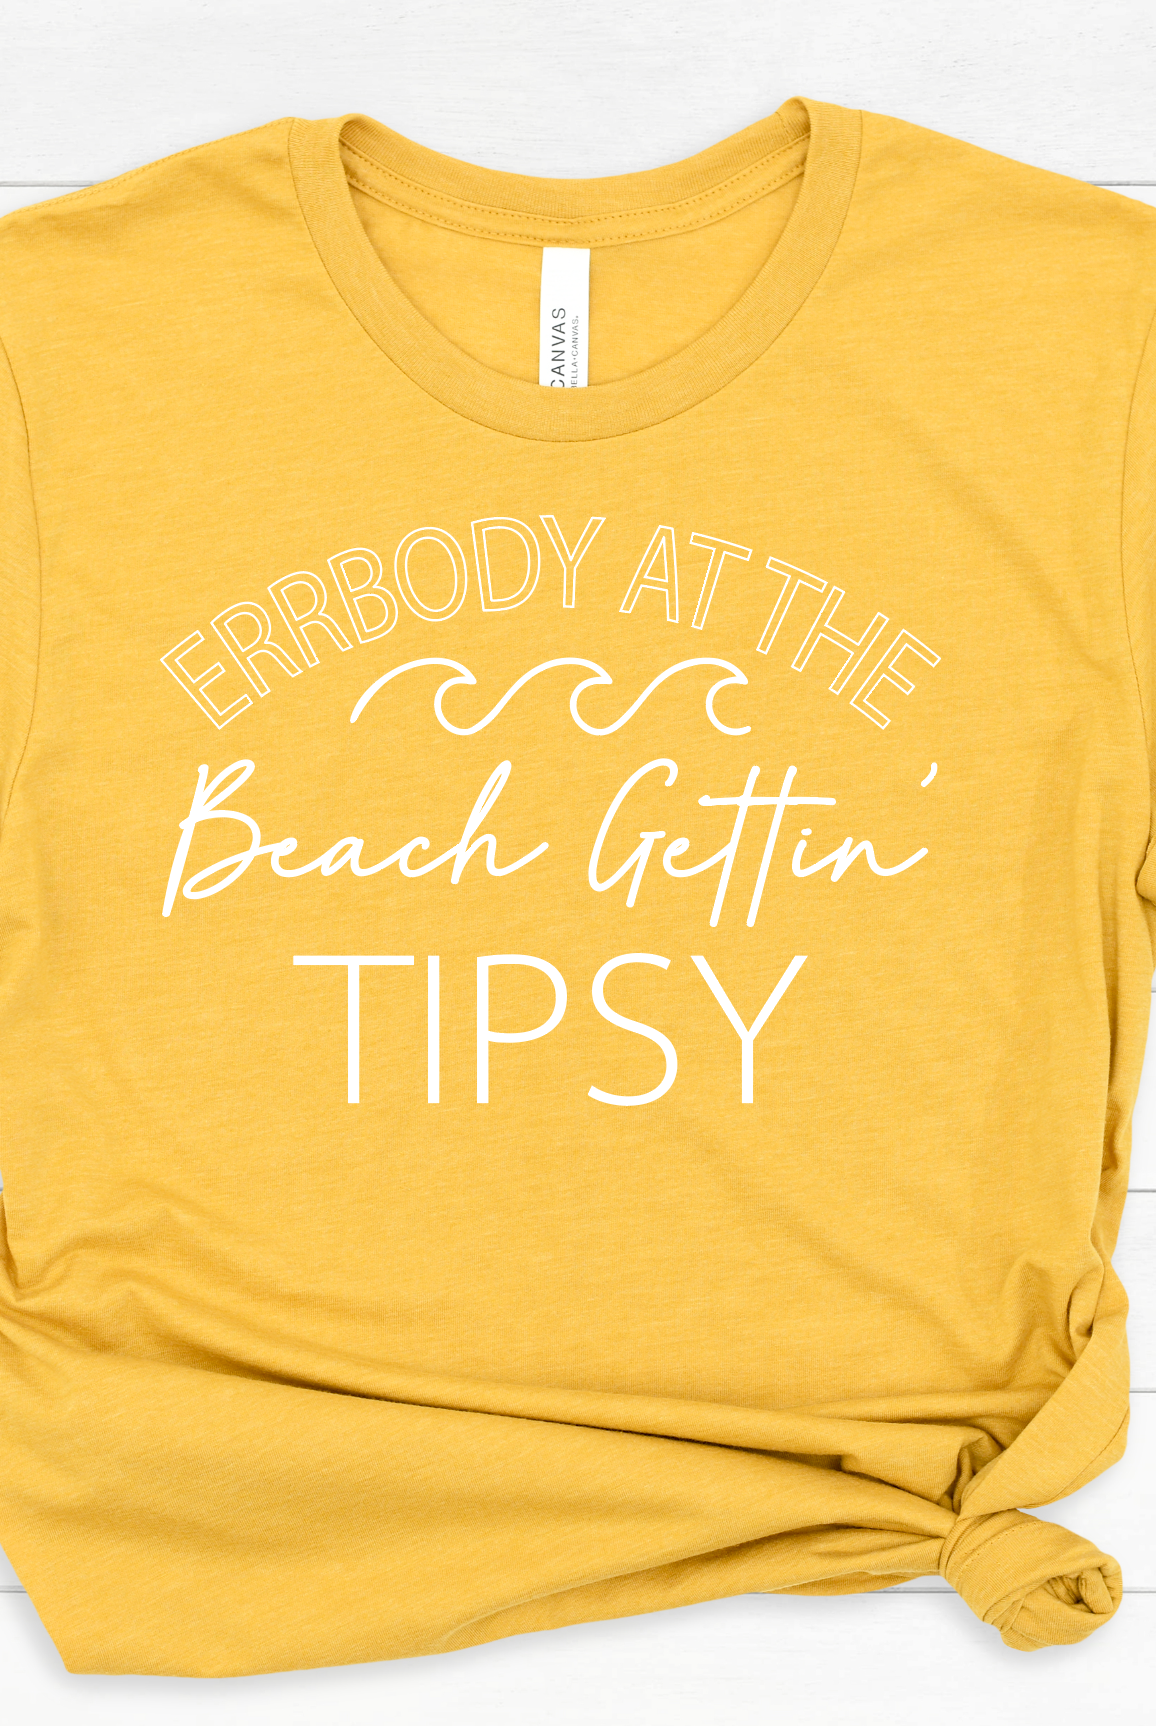 ERRBODY at the BEACH gettin' tipsy-Graphic Tee- Simply Simpson's Boutique is a Women's Online Fashion Boutique Located in Jupiter, Florida